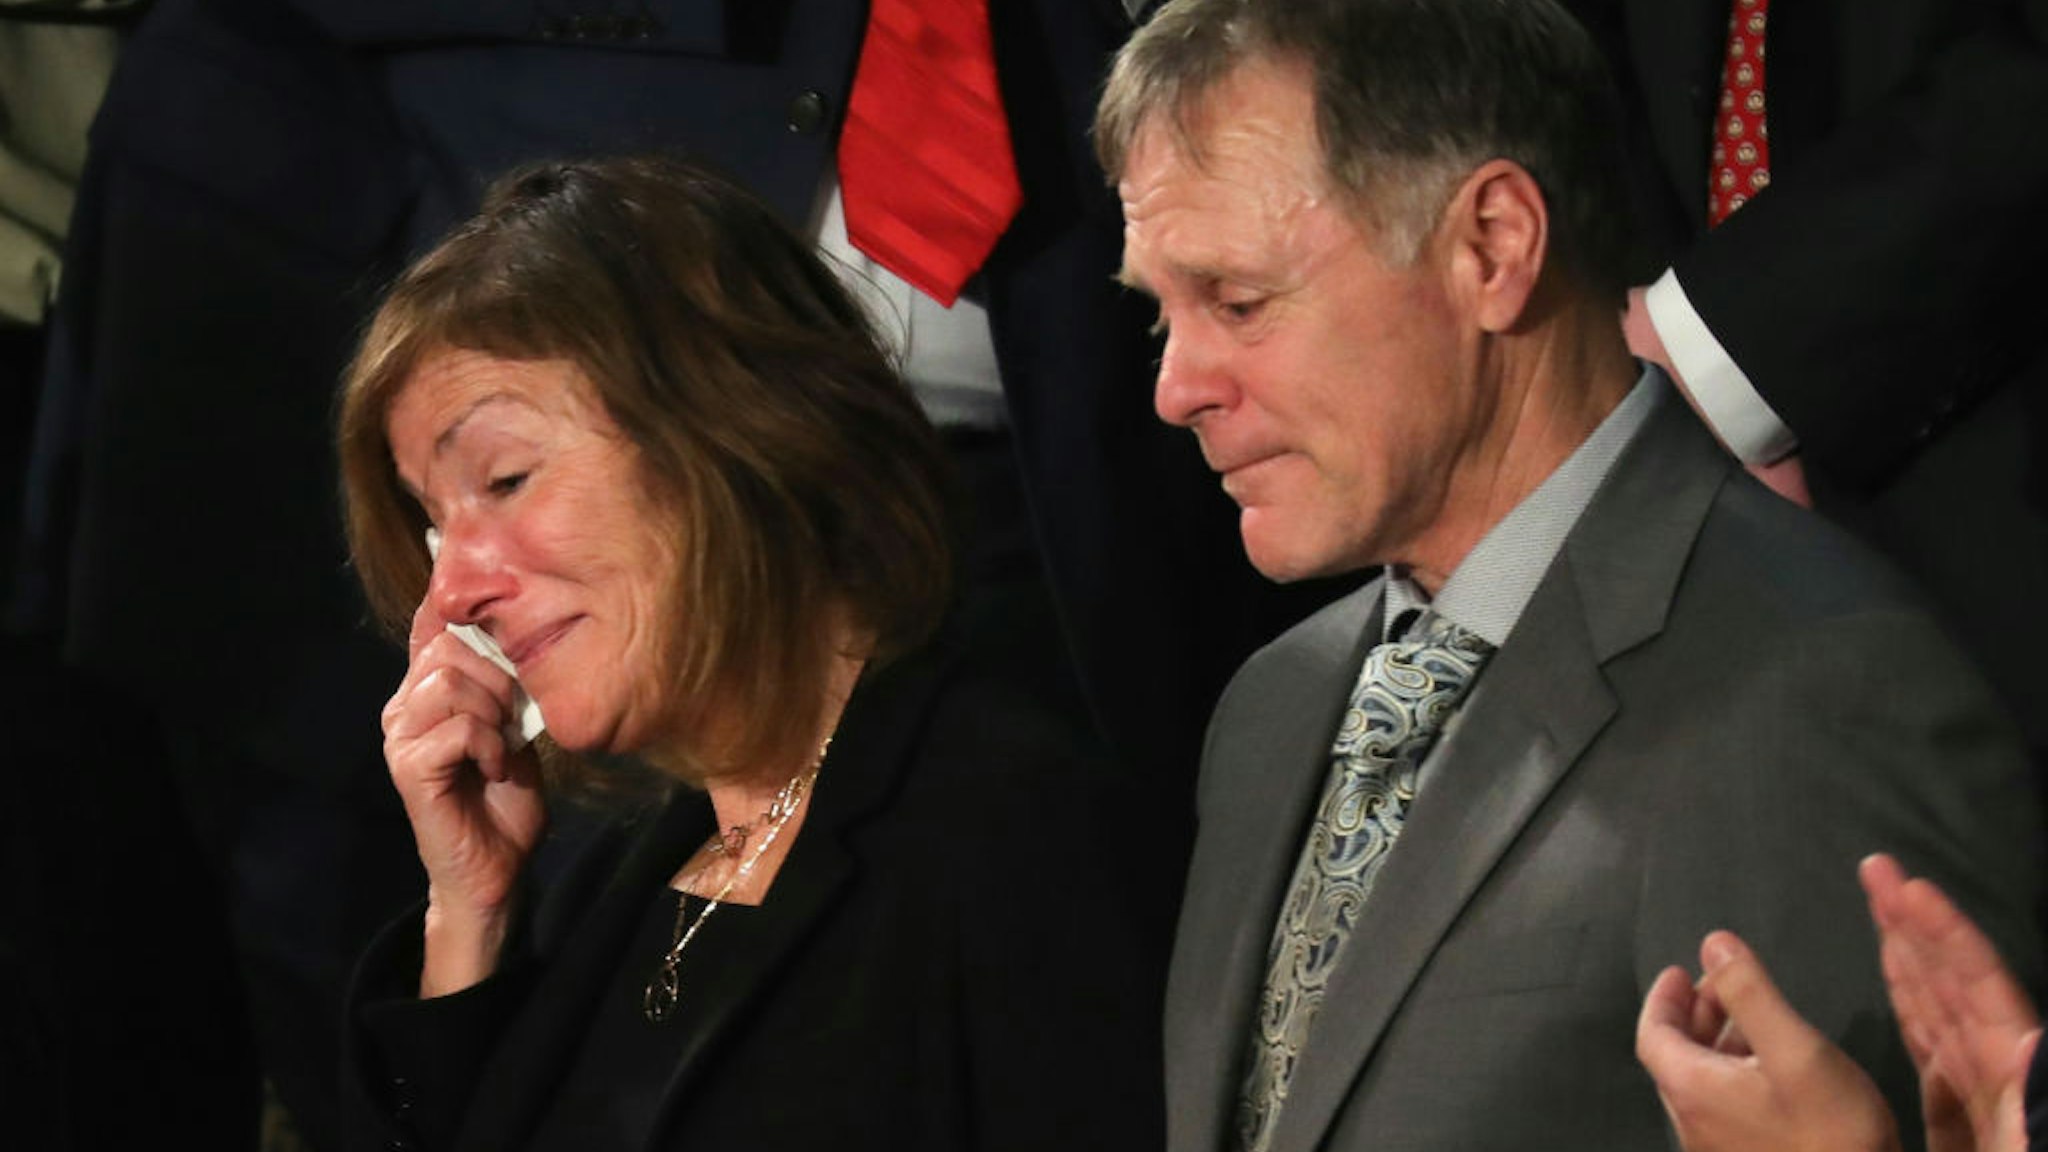 Parents of Otto Warmbier, Fred and Cindy Warmbier are acknowledged during the State of the Union address in the chamber of the U.S. House of Representatives January 30, 2018 in Washington, DC.